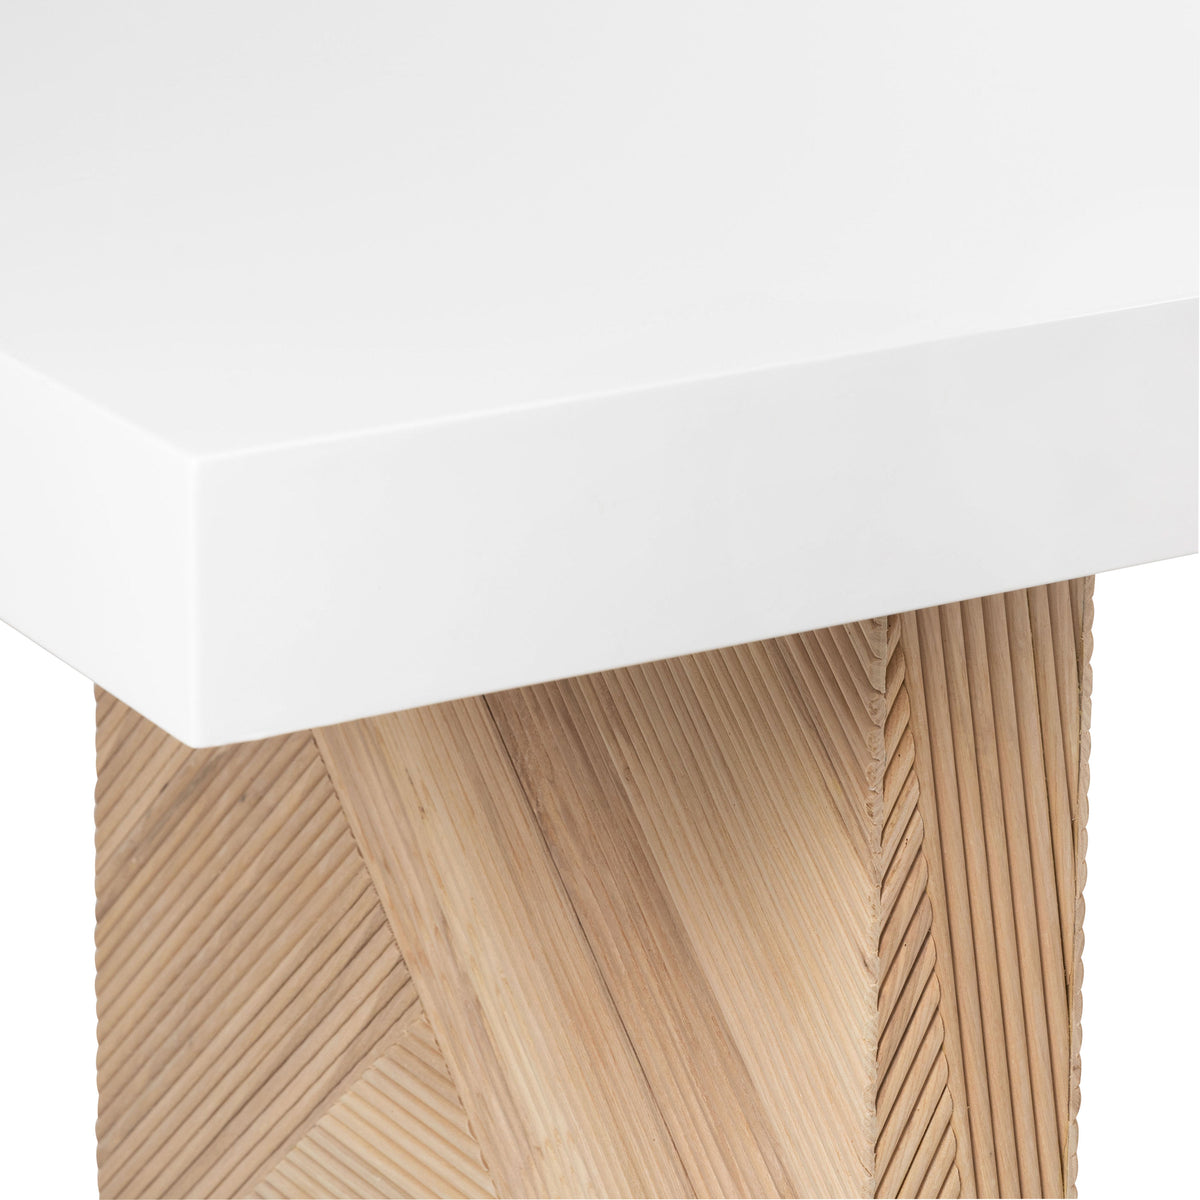 Milan 3 Dining Table with Solid Ash Legs